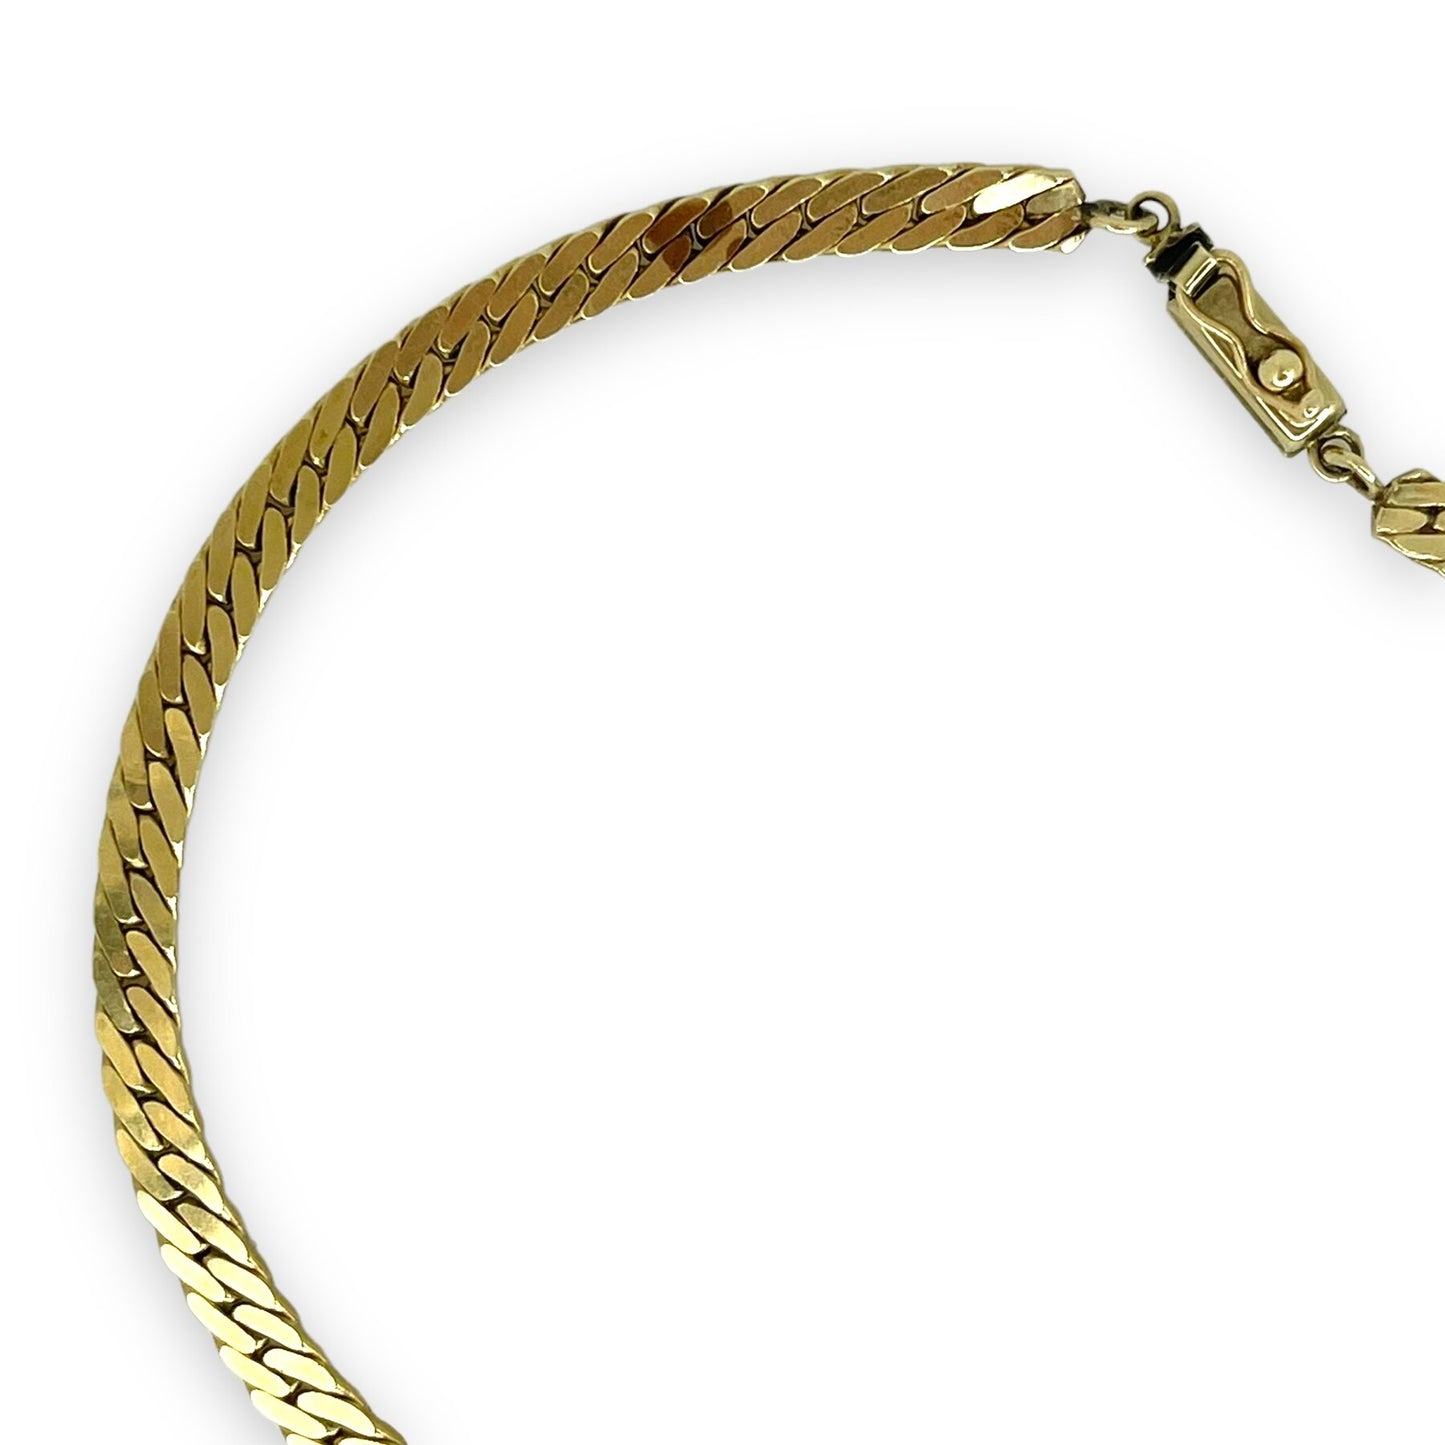 VINTAGE 14K CLOSED CURB-LINK GOLD CHAIN NECKLACE